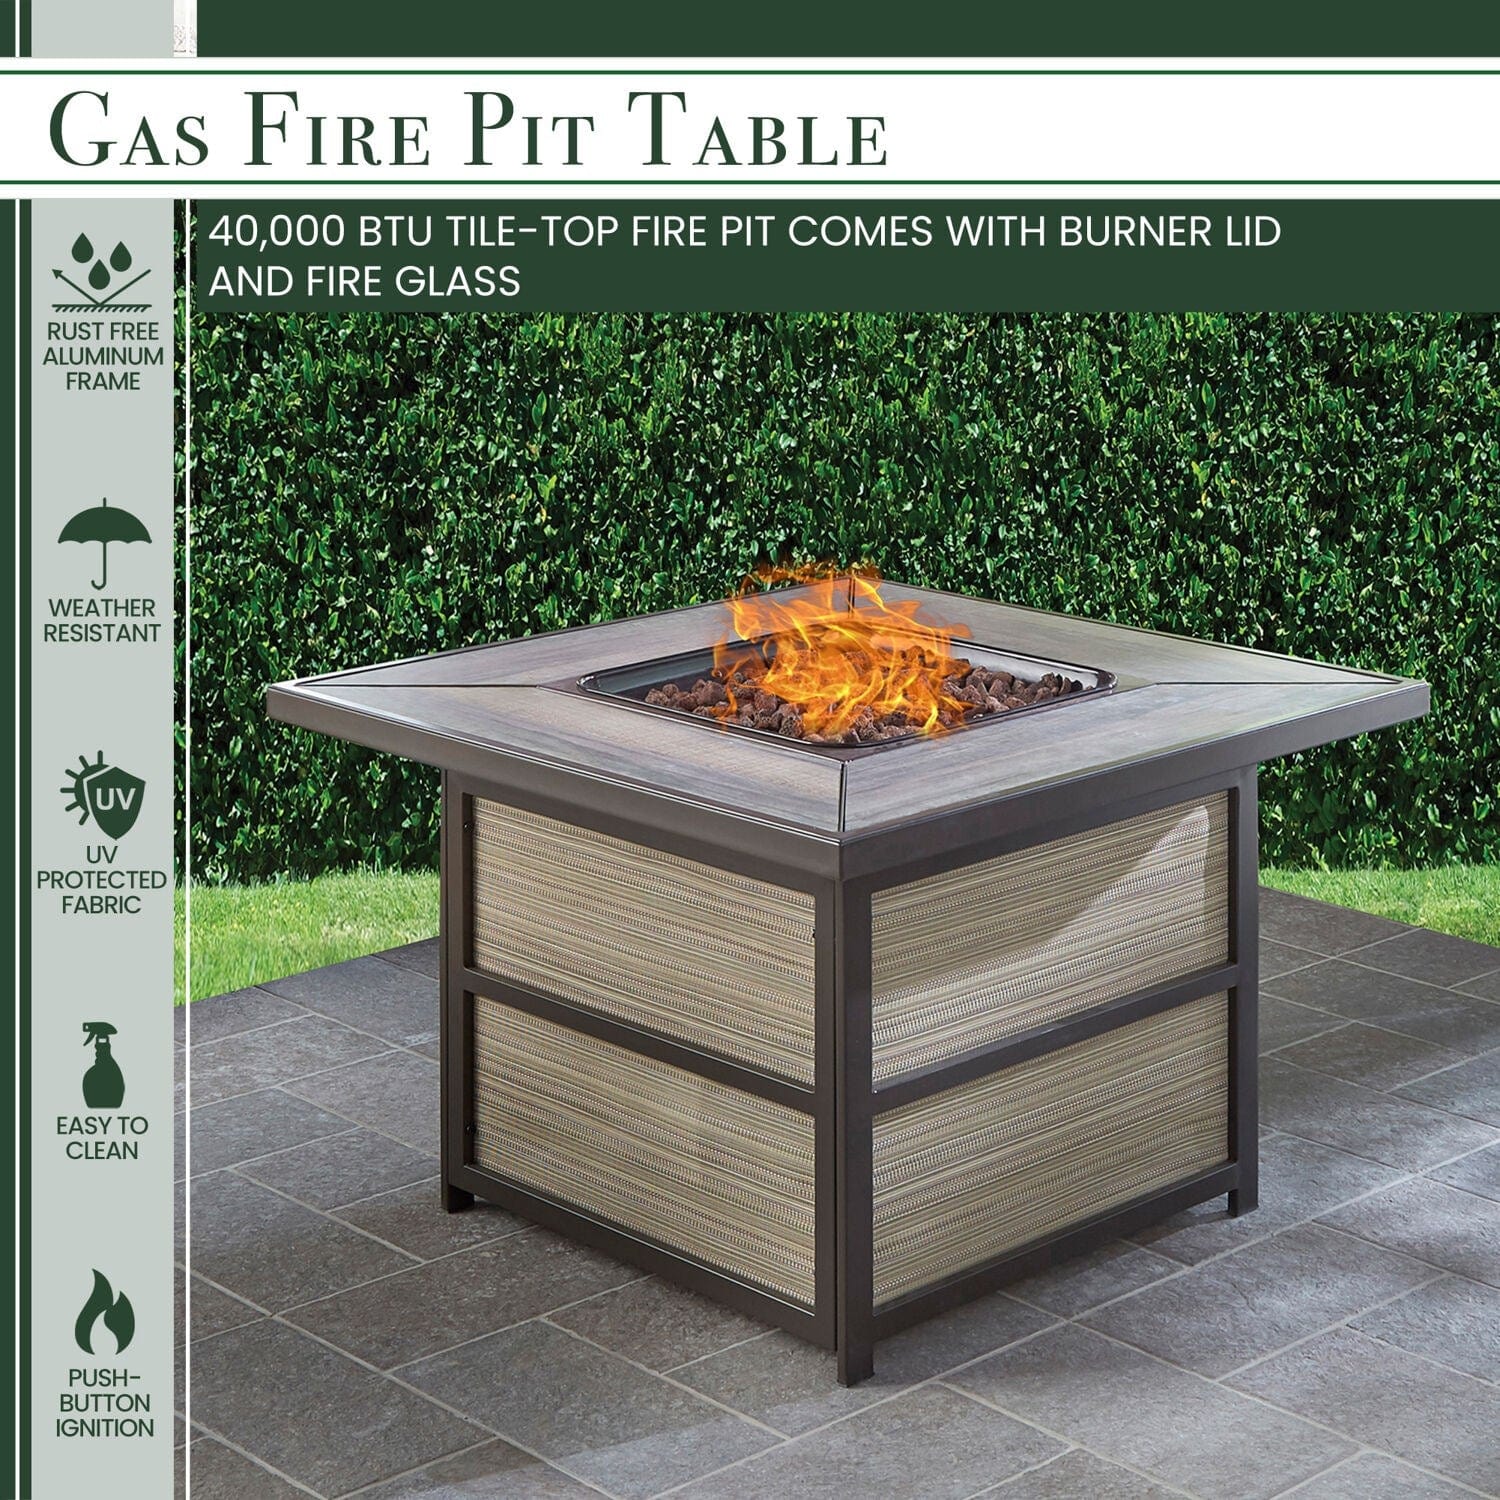 Hanover Fire Pit Chat Set Hanover Monaco 5-Piece Fire Pit Chat Set with 4 Sling Swivel Rockers and a 40,000 BTU Gas Fire Pit Coffee Table | MON5PCSQSW4FP